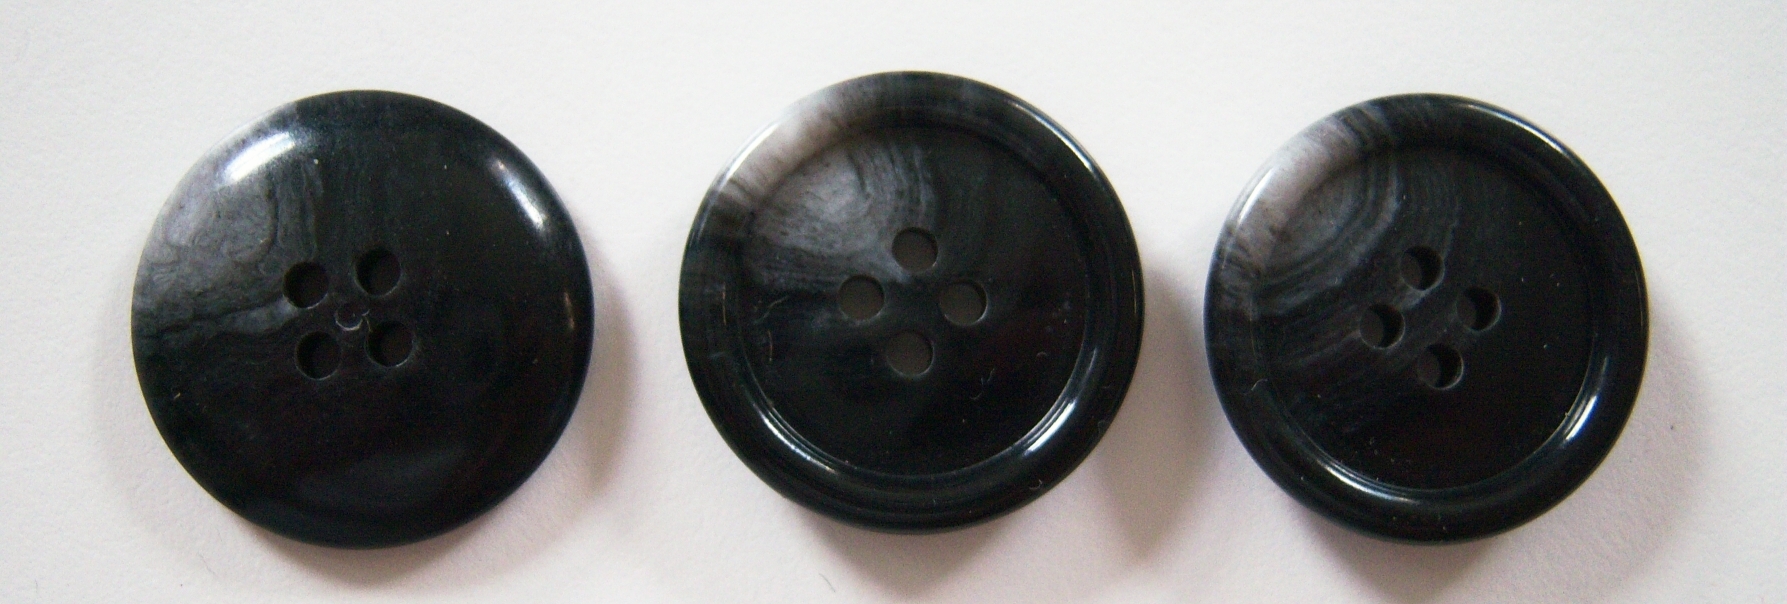 Black/Grey Marbled 1" Poly Button